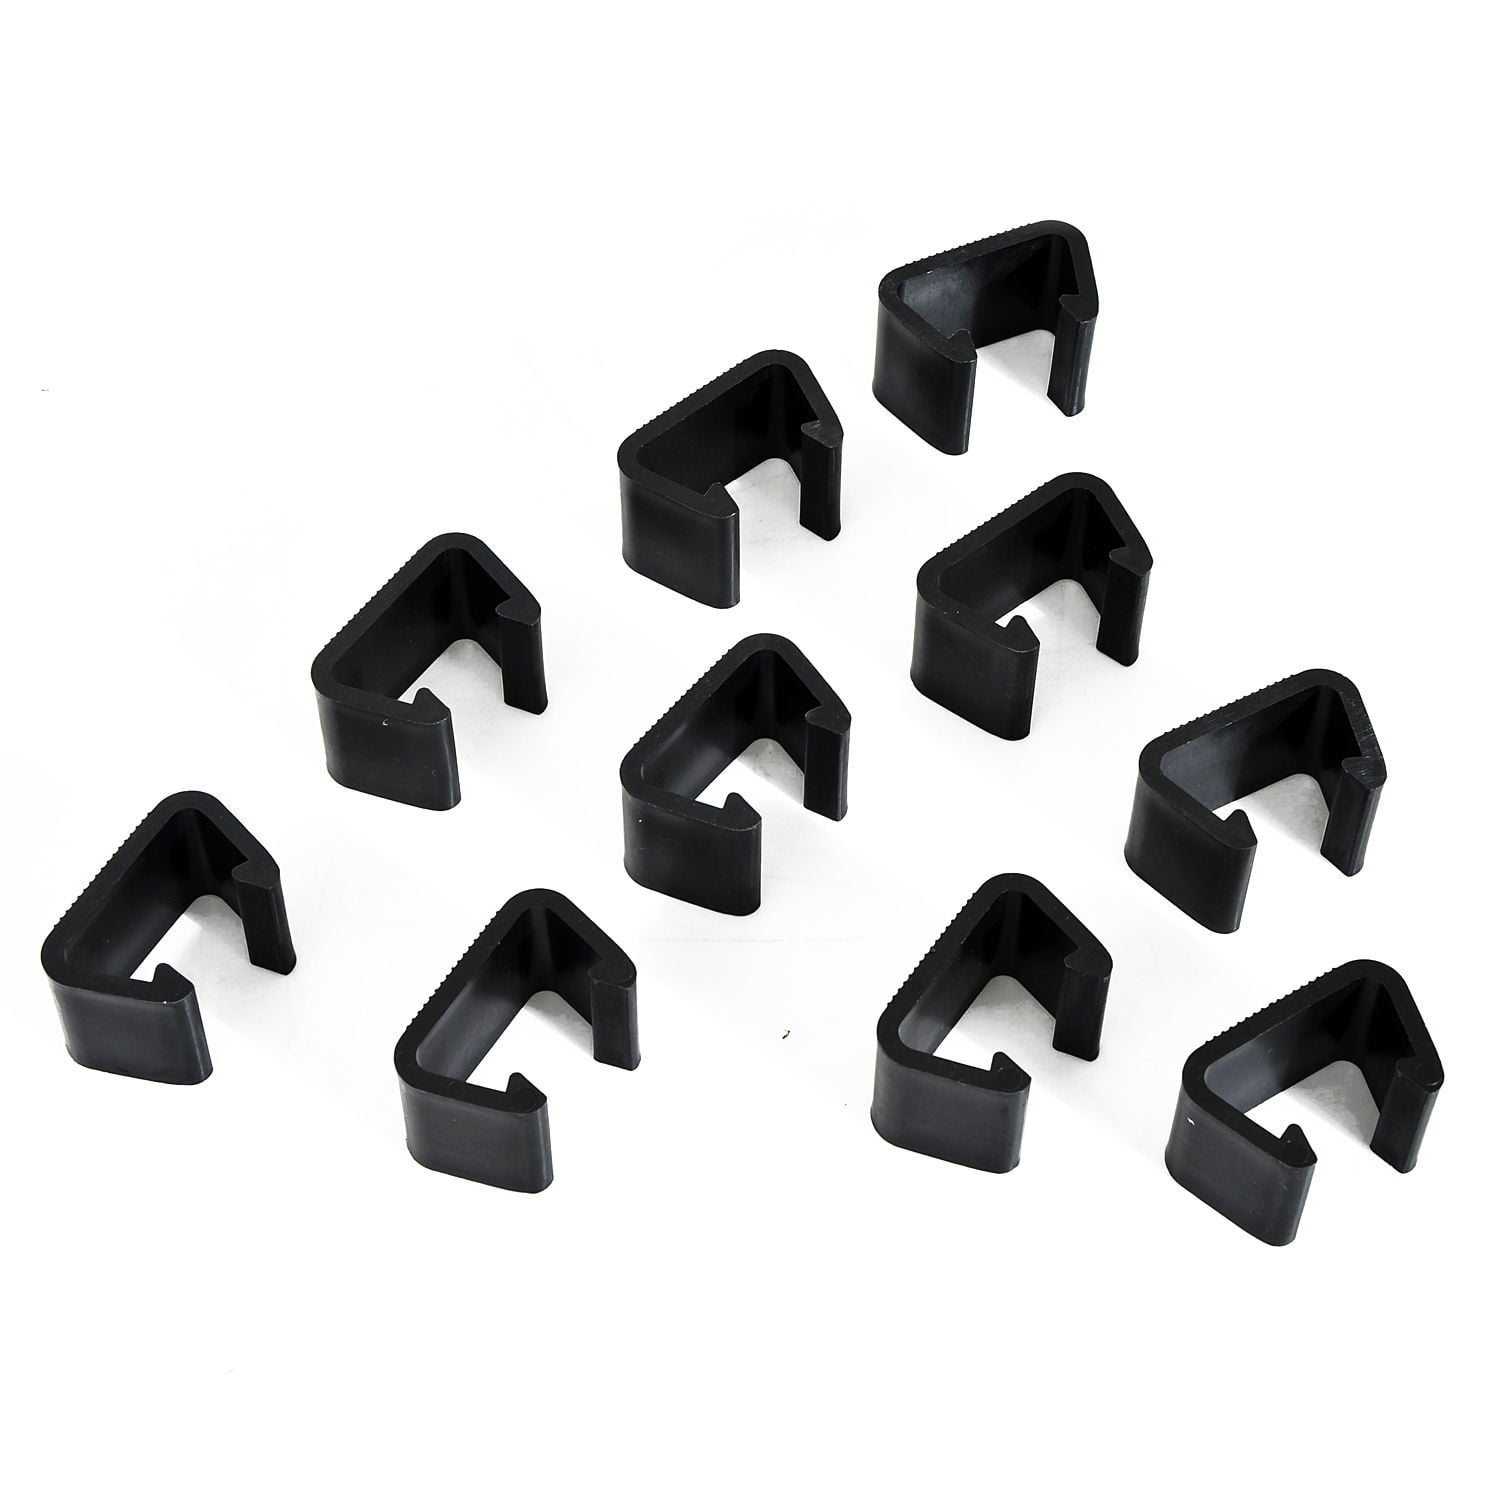 Wicker Furniture Clips WorthPlanet 8 Pcs Sectional Sofa Rattan Furniture Clamps Patio Alignment Fasteners Clips Rattan Sofa Clips for Outdoor Patio Sofa Rattan Chair Connector W200021